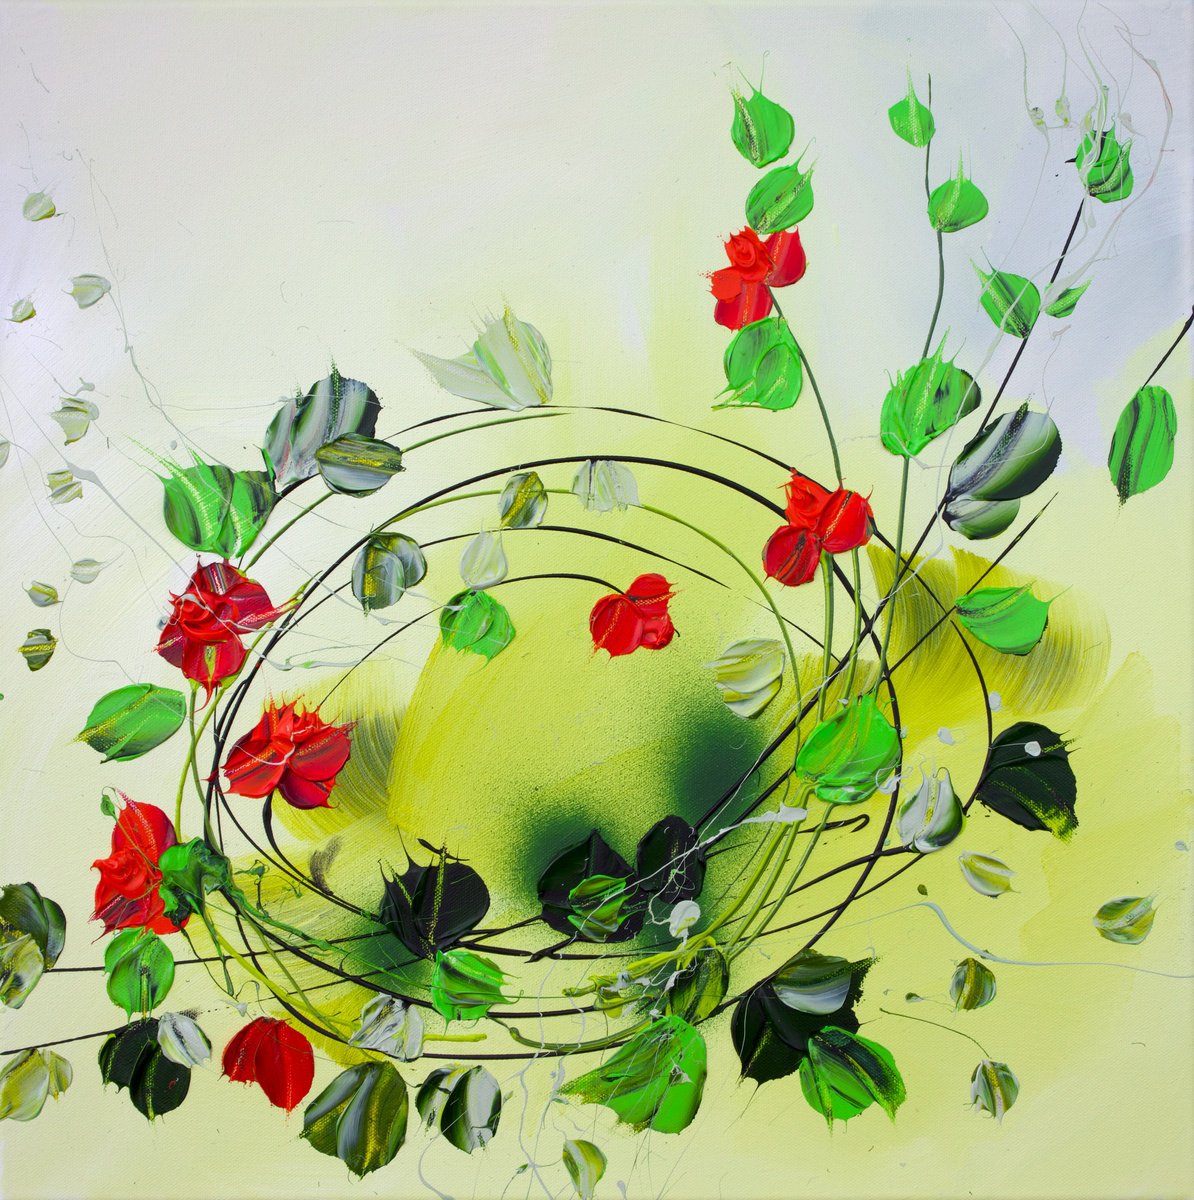 Swirling Flowers #2-? acrylic square artwork with roses 50x50cm by Anastassia Skopp